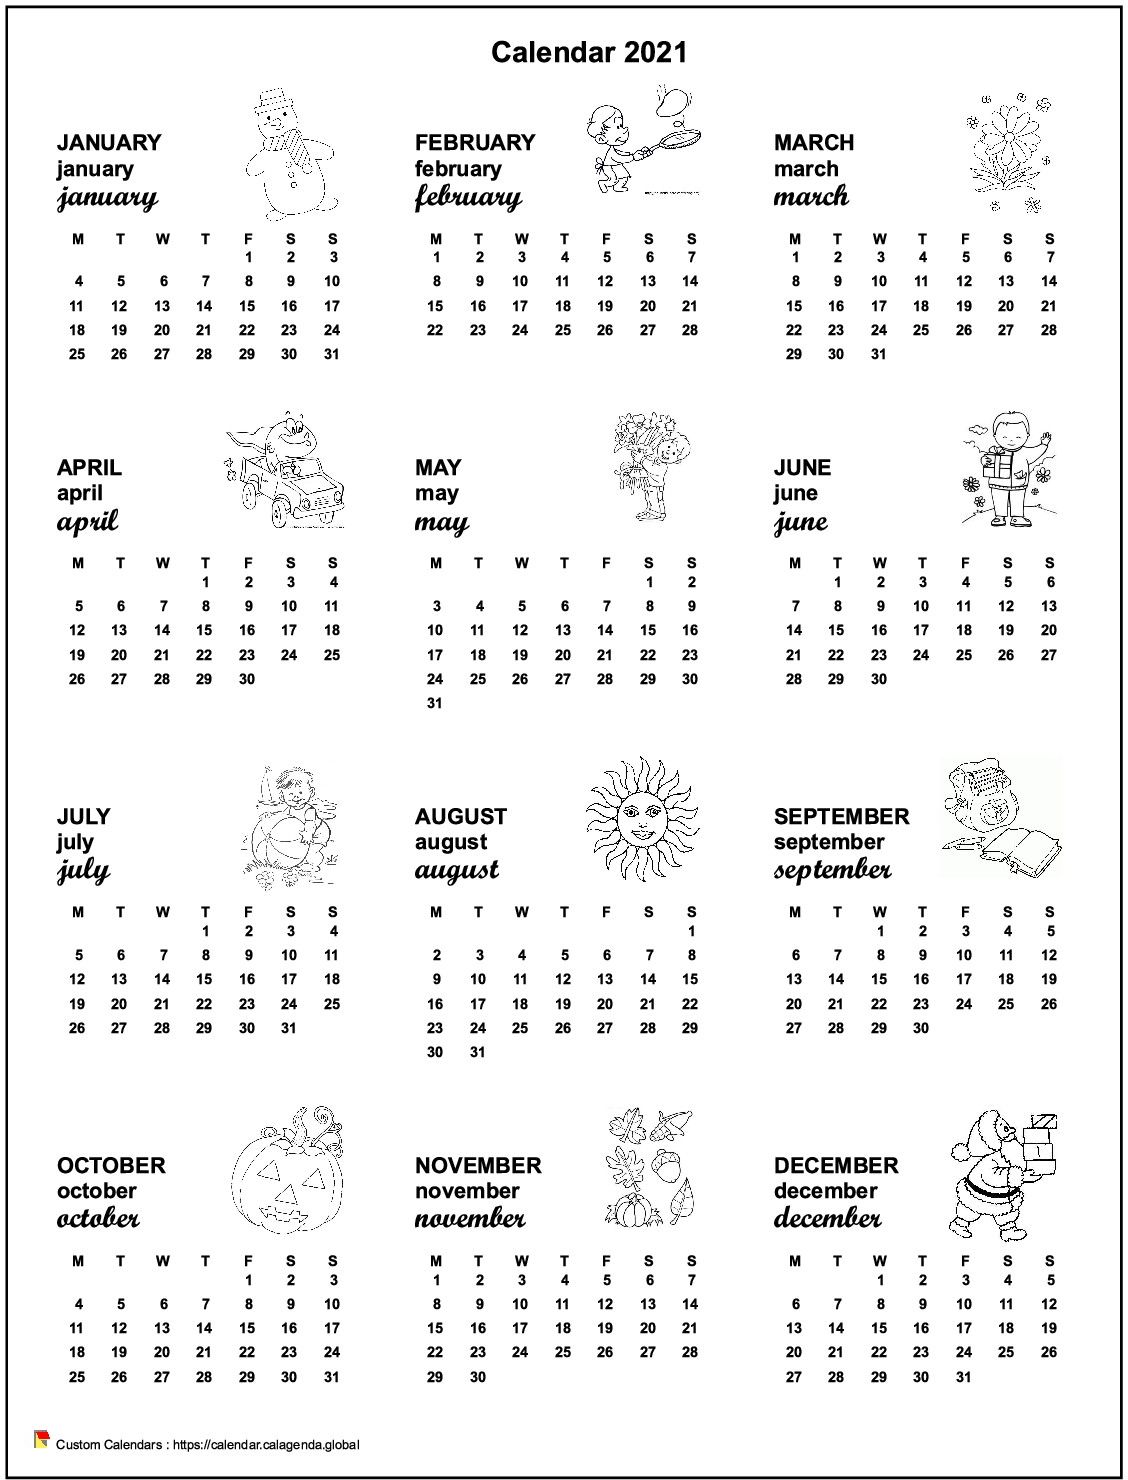 Calendar 2061 annual maternal and primary school